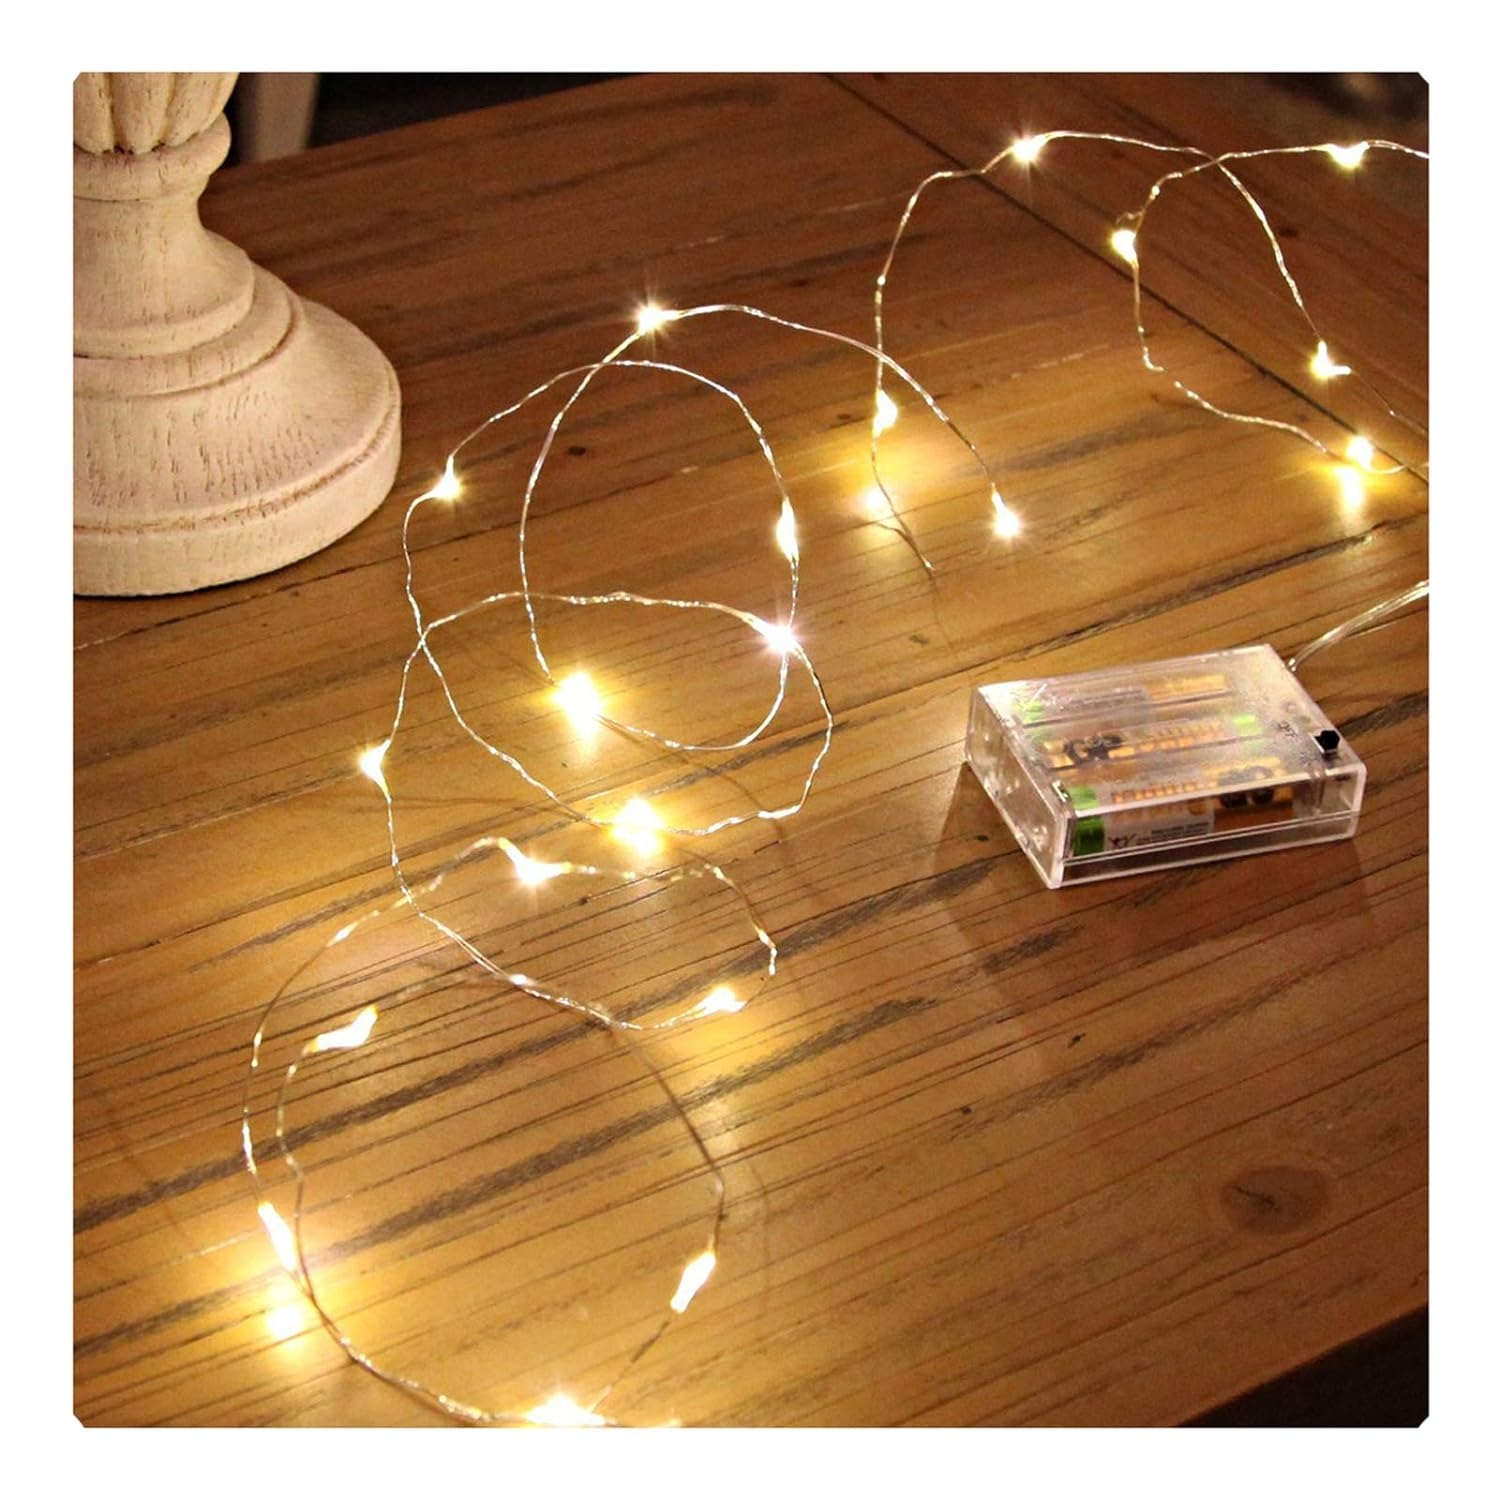 Sanniu Led String Lights, Mini Battery Powered Copper Wire Starry Fairy Lights, Battery Operated Lights for Bedroom, Christmas, Parties, Wedding, Centerpiece, Decoration (5m/16ft Warm White)